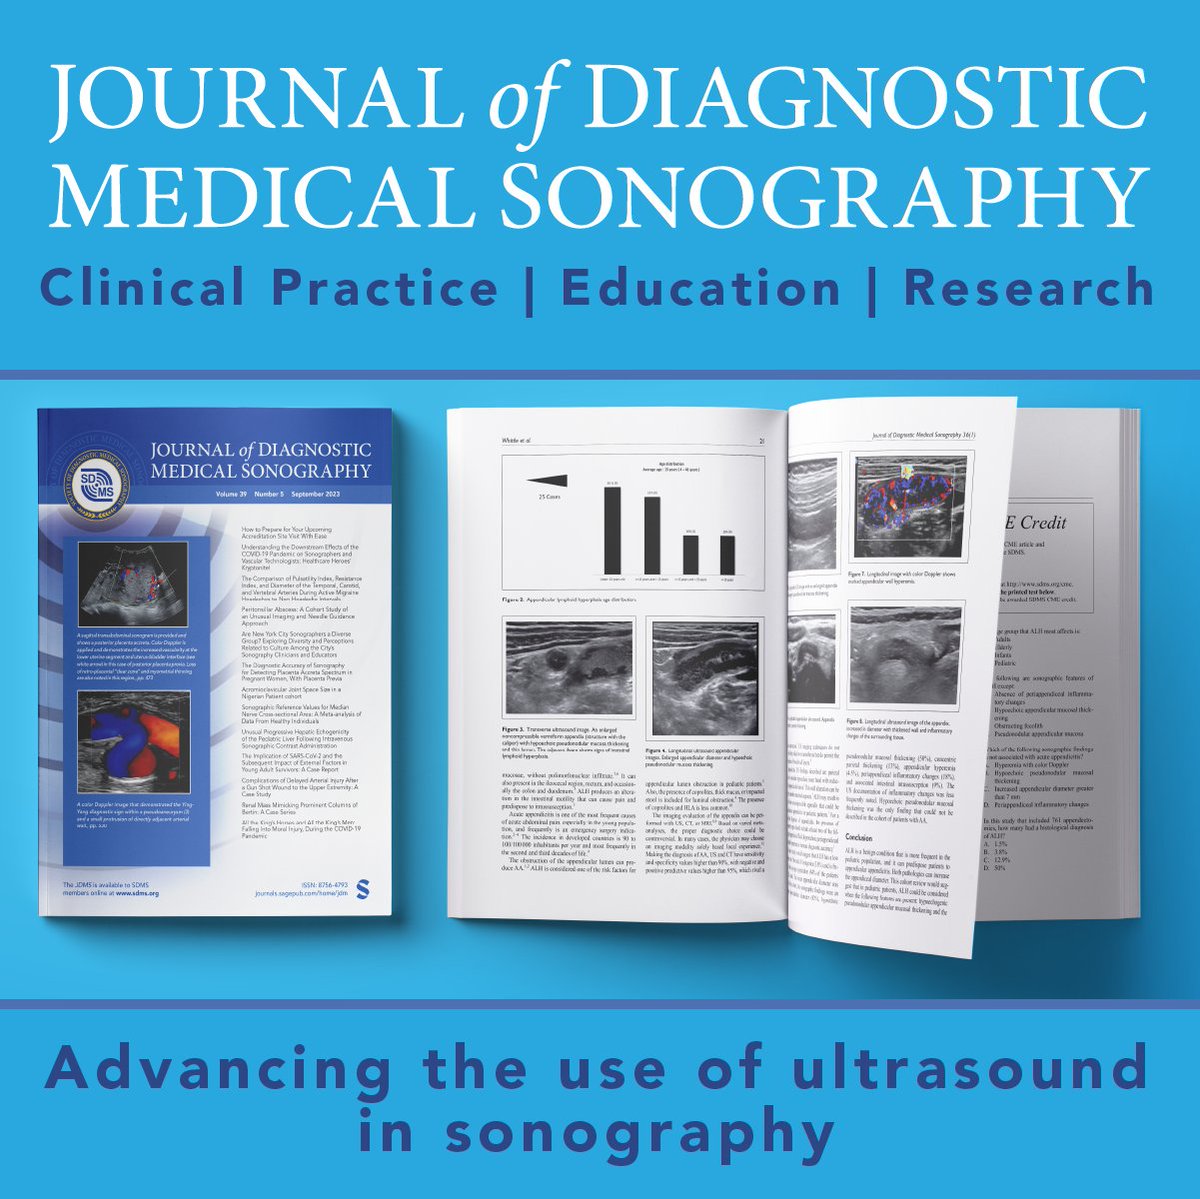 Read '#Case #Series: Multiple Soft Tissue Lesions Demonstrated by #Sonography and #MRI Correlation' by Garth S. Nanni in the latest issue of #JDMS! @SageJournals 
bit.ly/3V2peAS #CaseStudy
Note: This is SDMS Members Only Content - You must login to view.